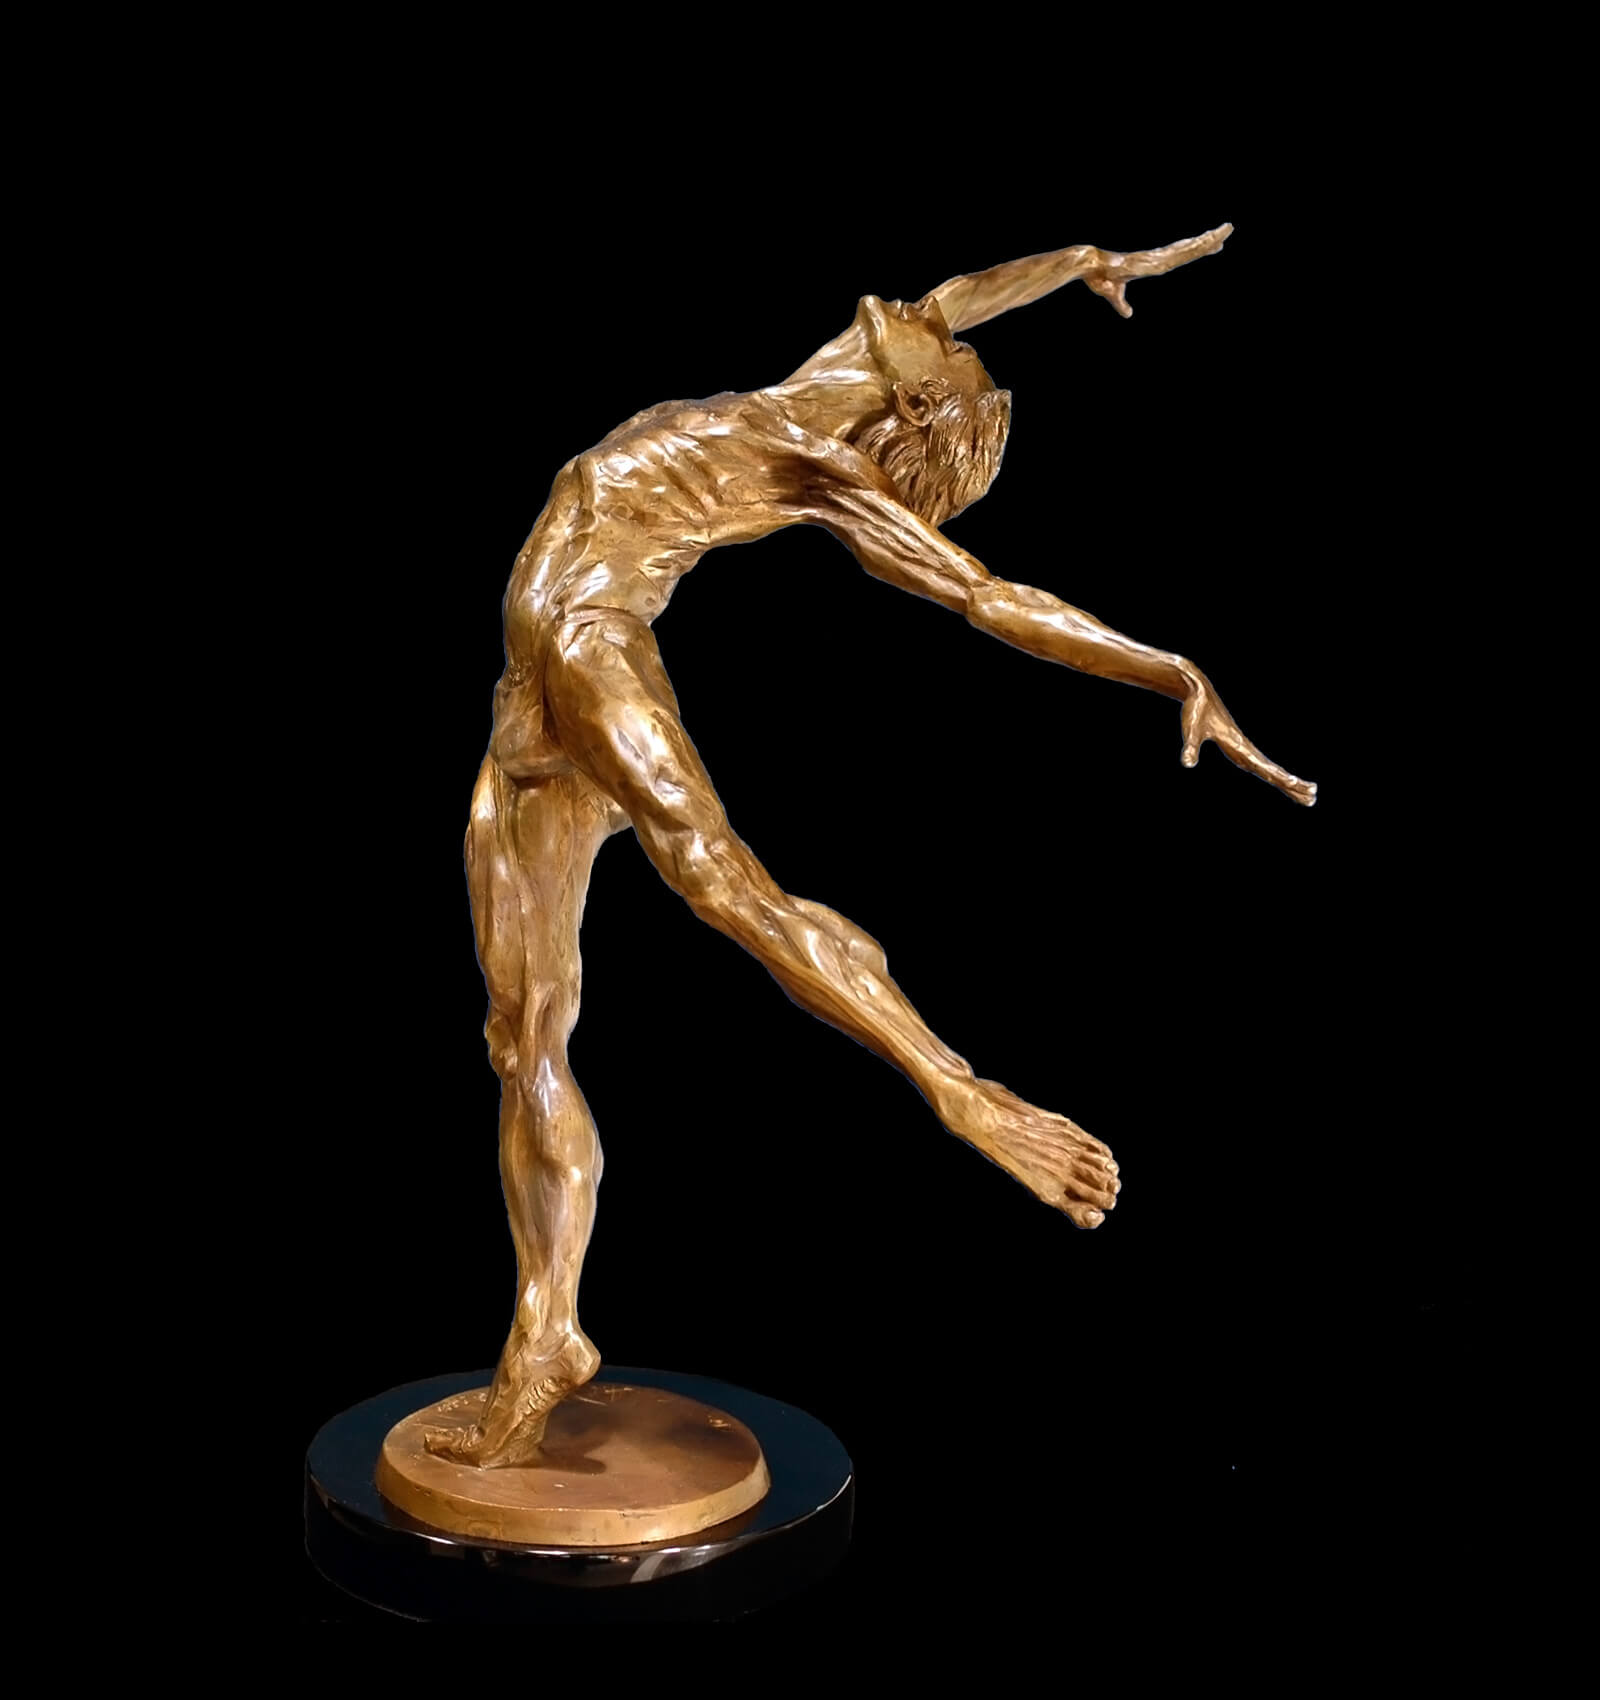 Odyssey ⋆ Andrew Devries ⋆ Figurative Bronze Sculpture And Paintings